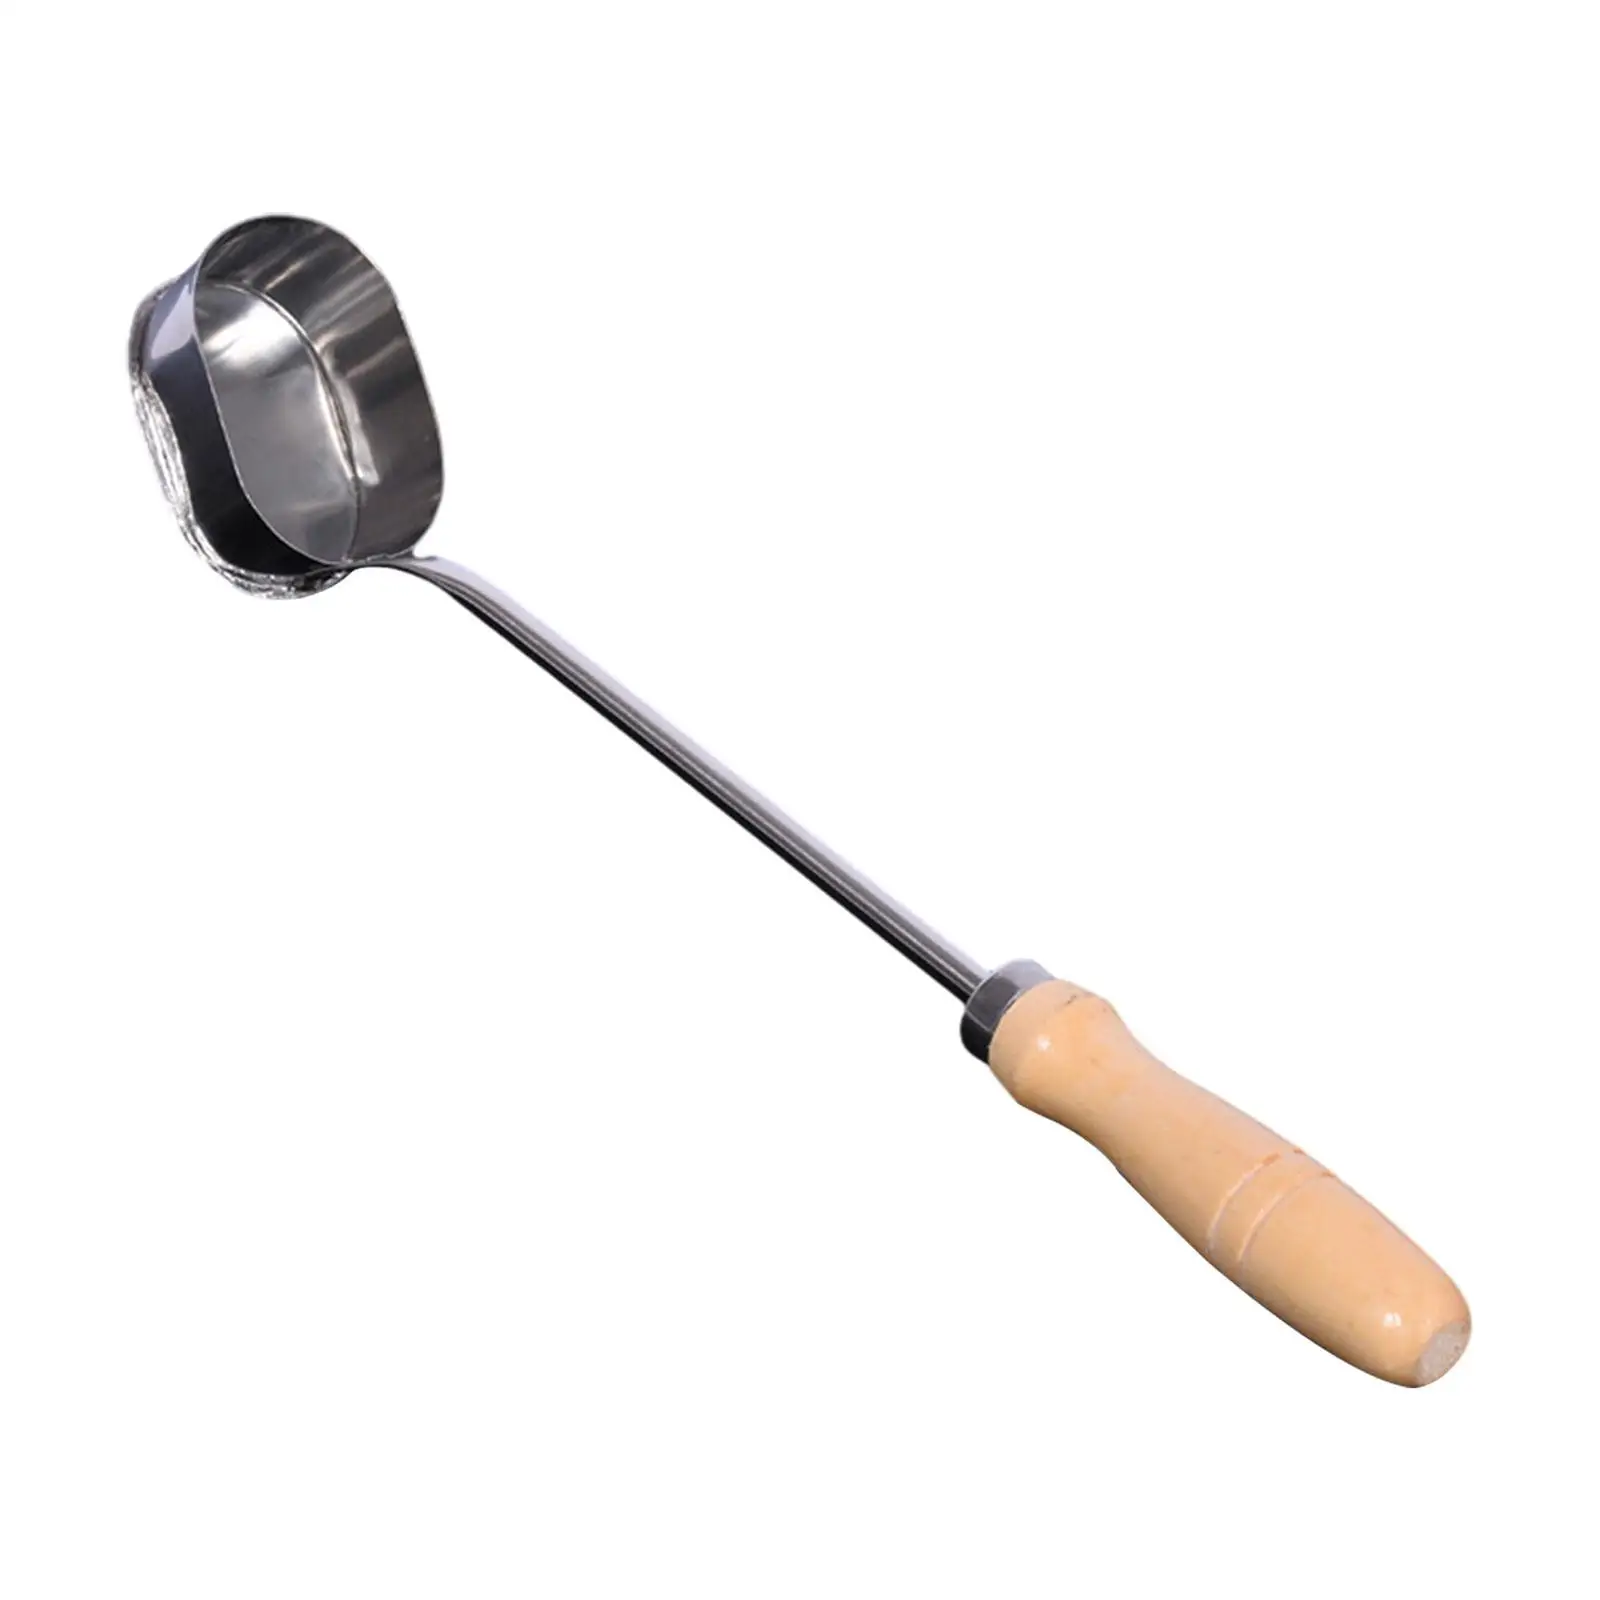 Meat Patty Maker Stainless Steel Comfortable Handle Durable Easy to Clean Portable Manual Fried Meat Spoon Cooking Tools